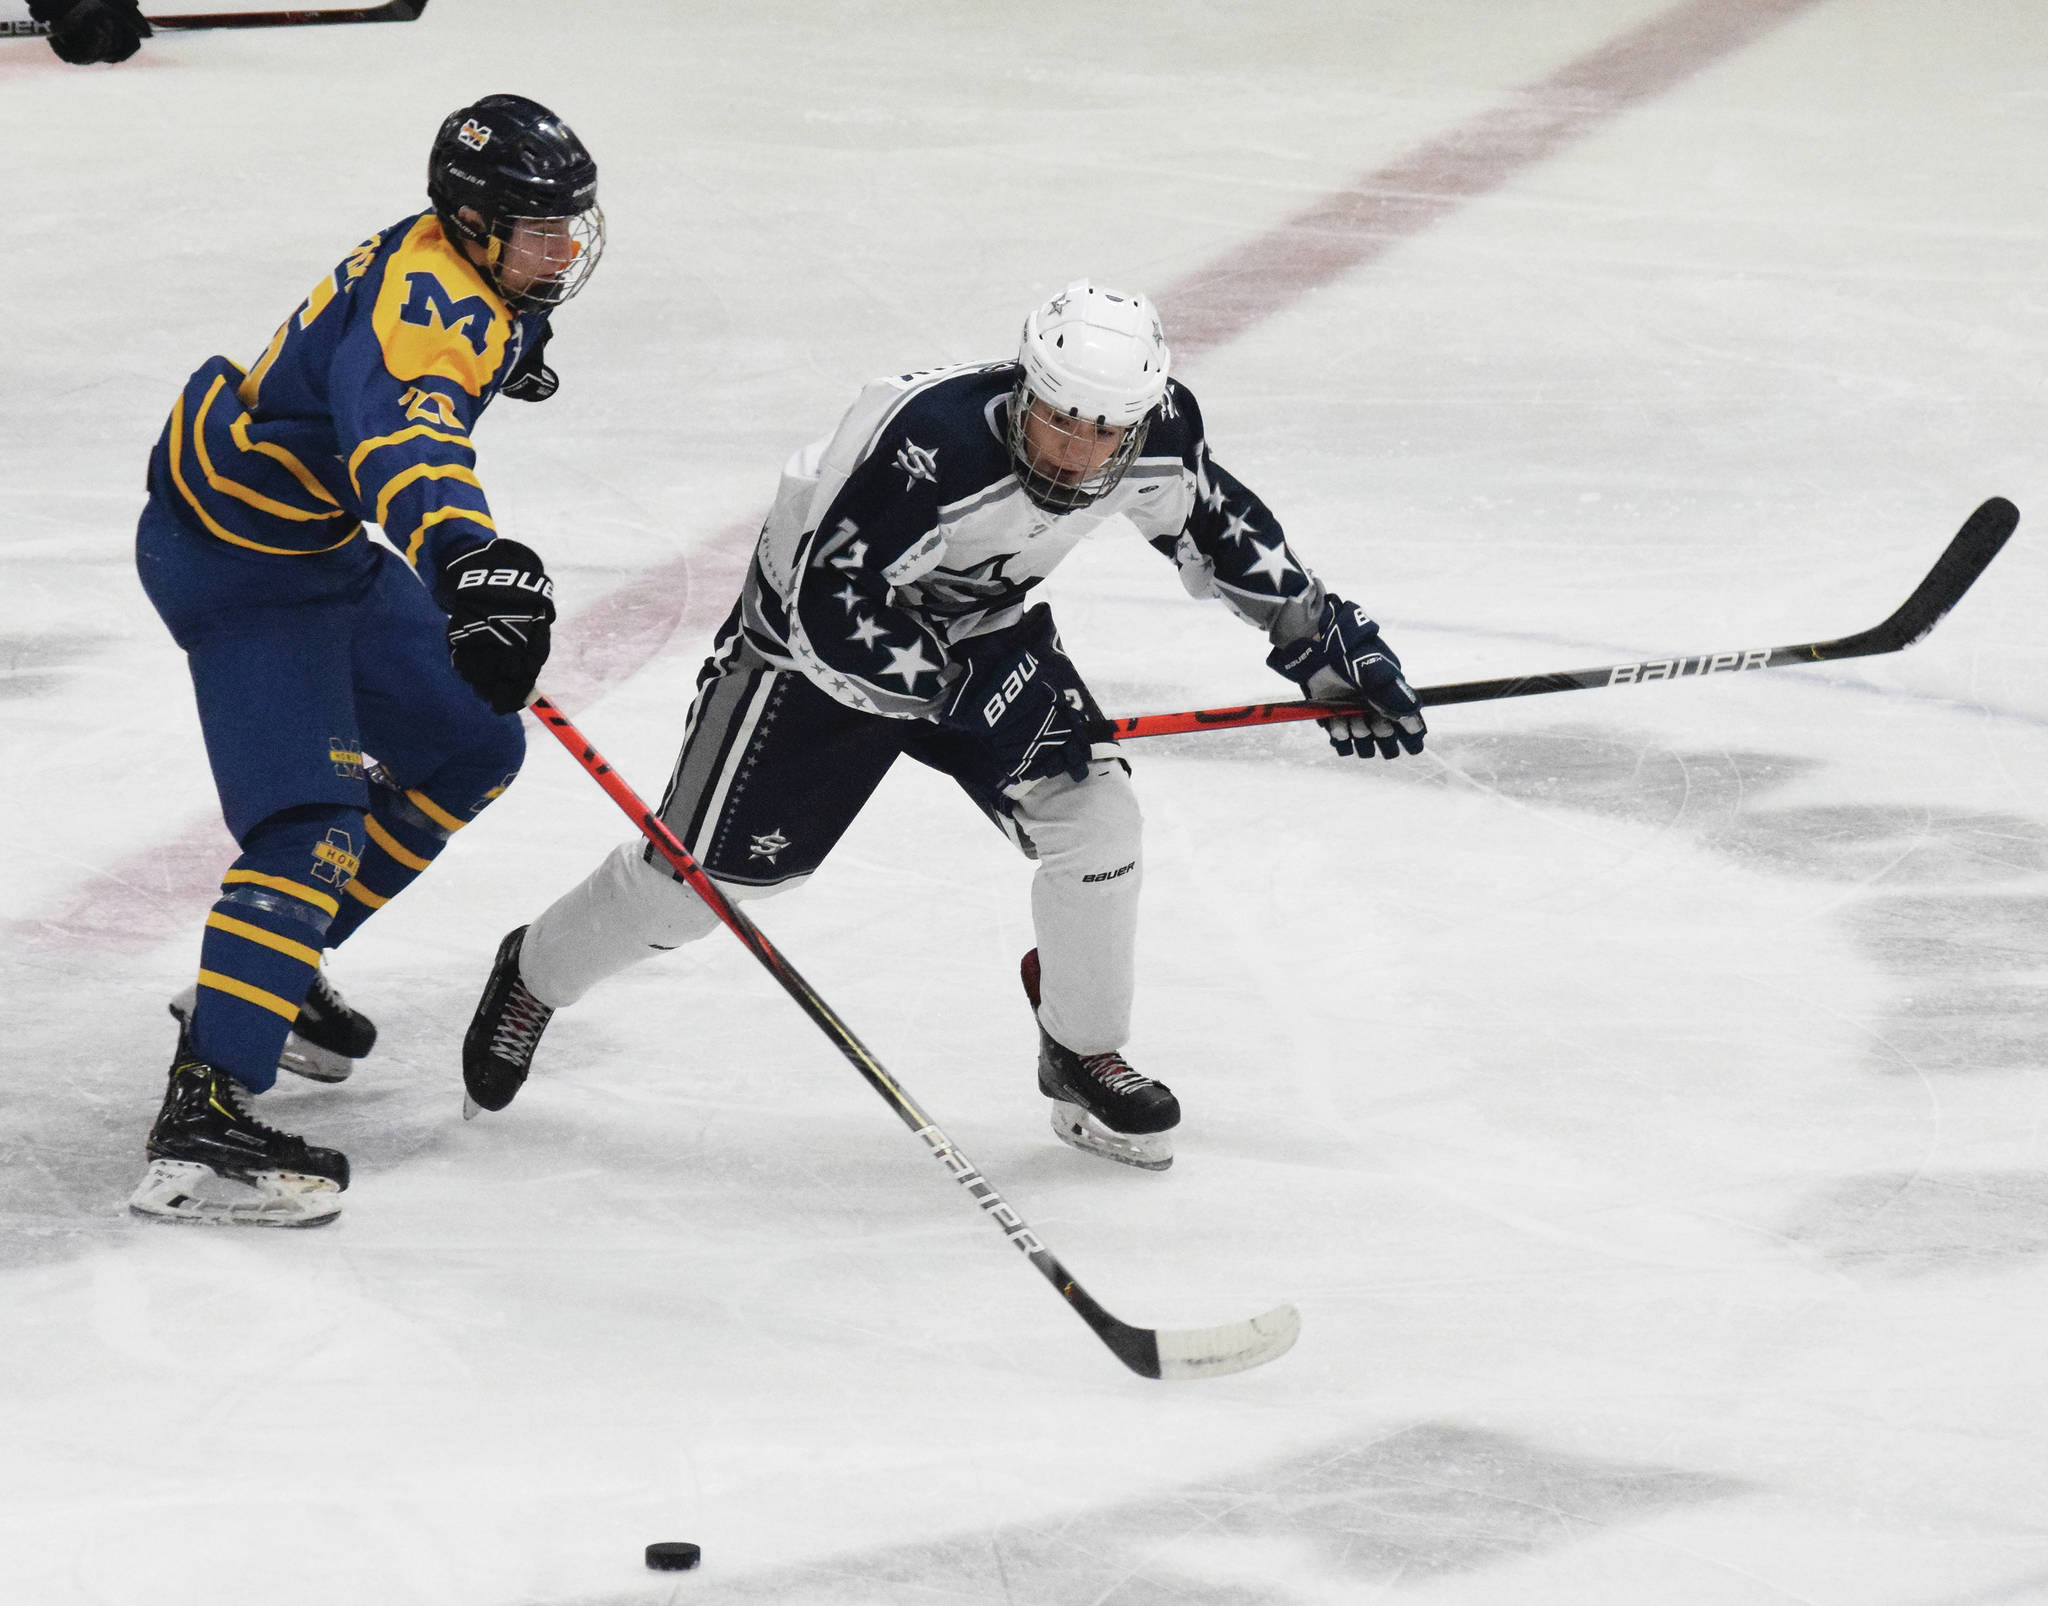 Soldotna’s Aiden Burcham battles for the puck with Homer’s Ethan Pitzman, Friday, Nov. 22, 2019, at the Soldotna Regional Sports Complex in Soldotna, Alaska. (Photo by Joey Klecka/Peninsula Clarion)